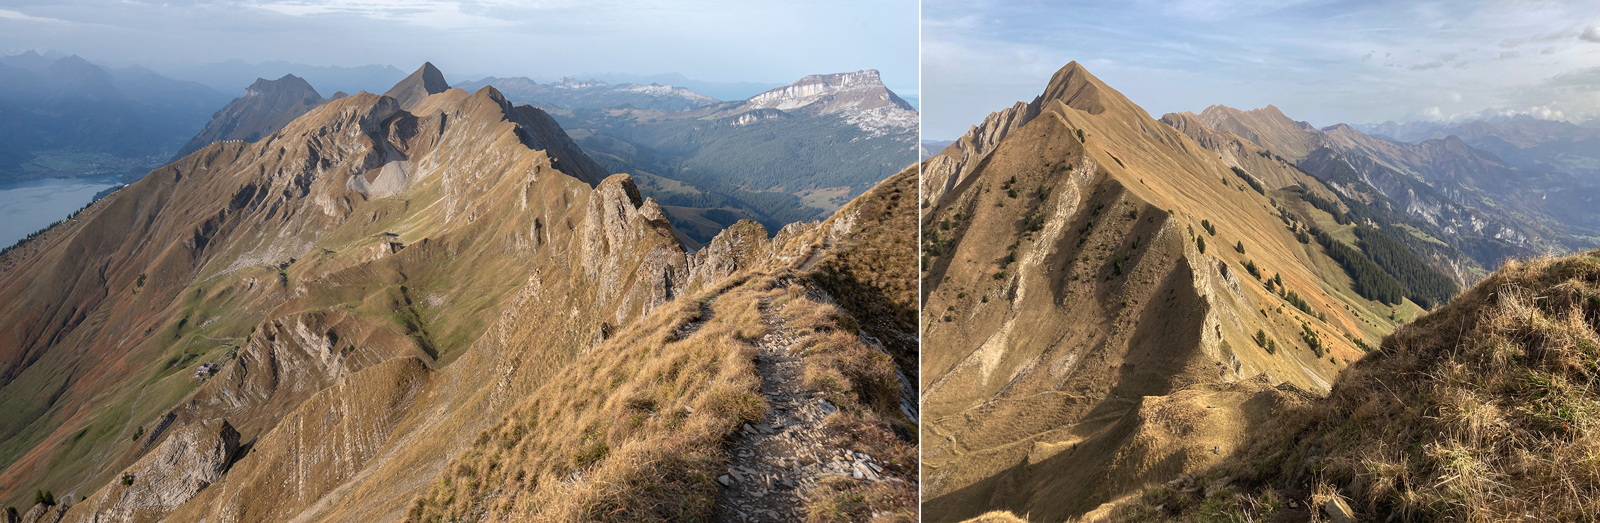 View from Brienzer Rothorn at the start of the hike and view from Gummhoren, just past the halfway mark.